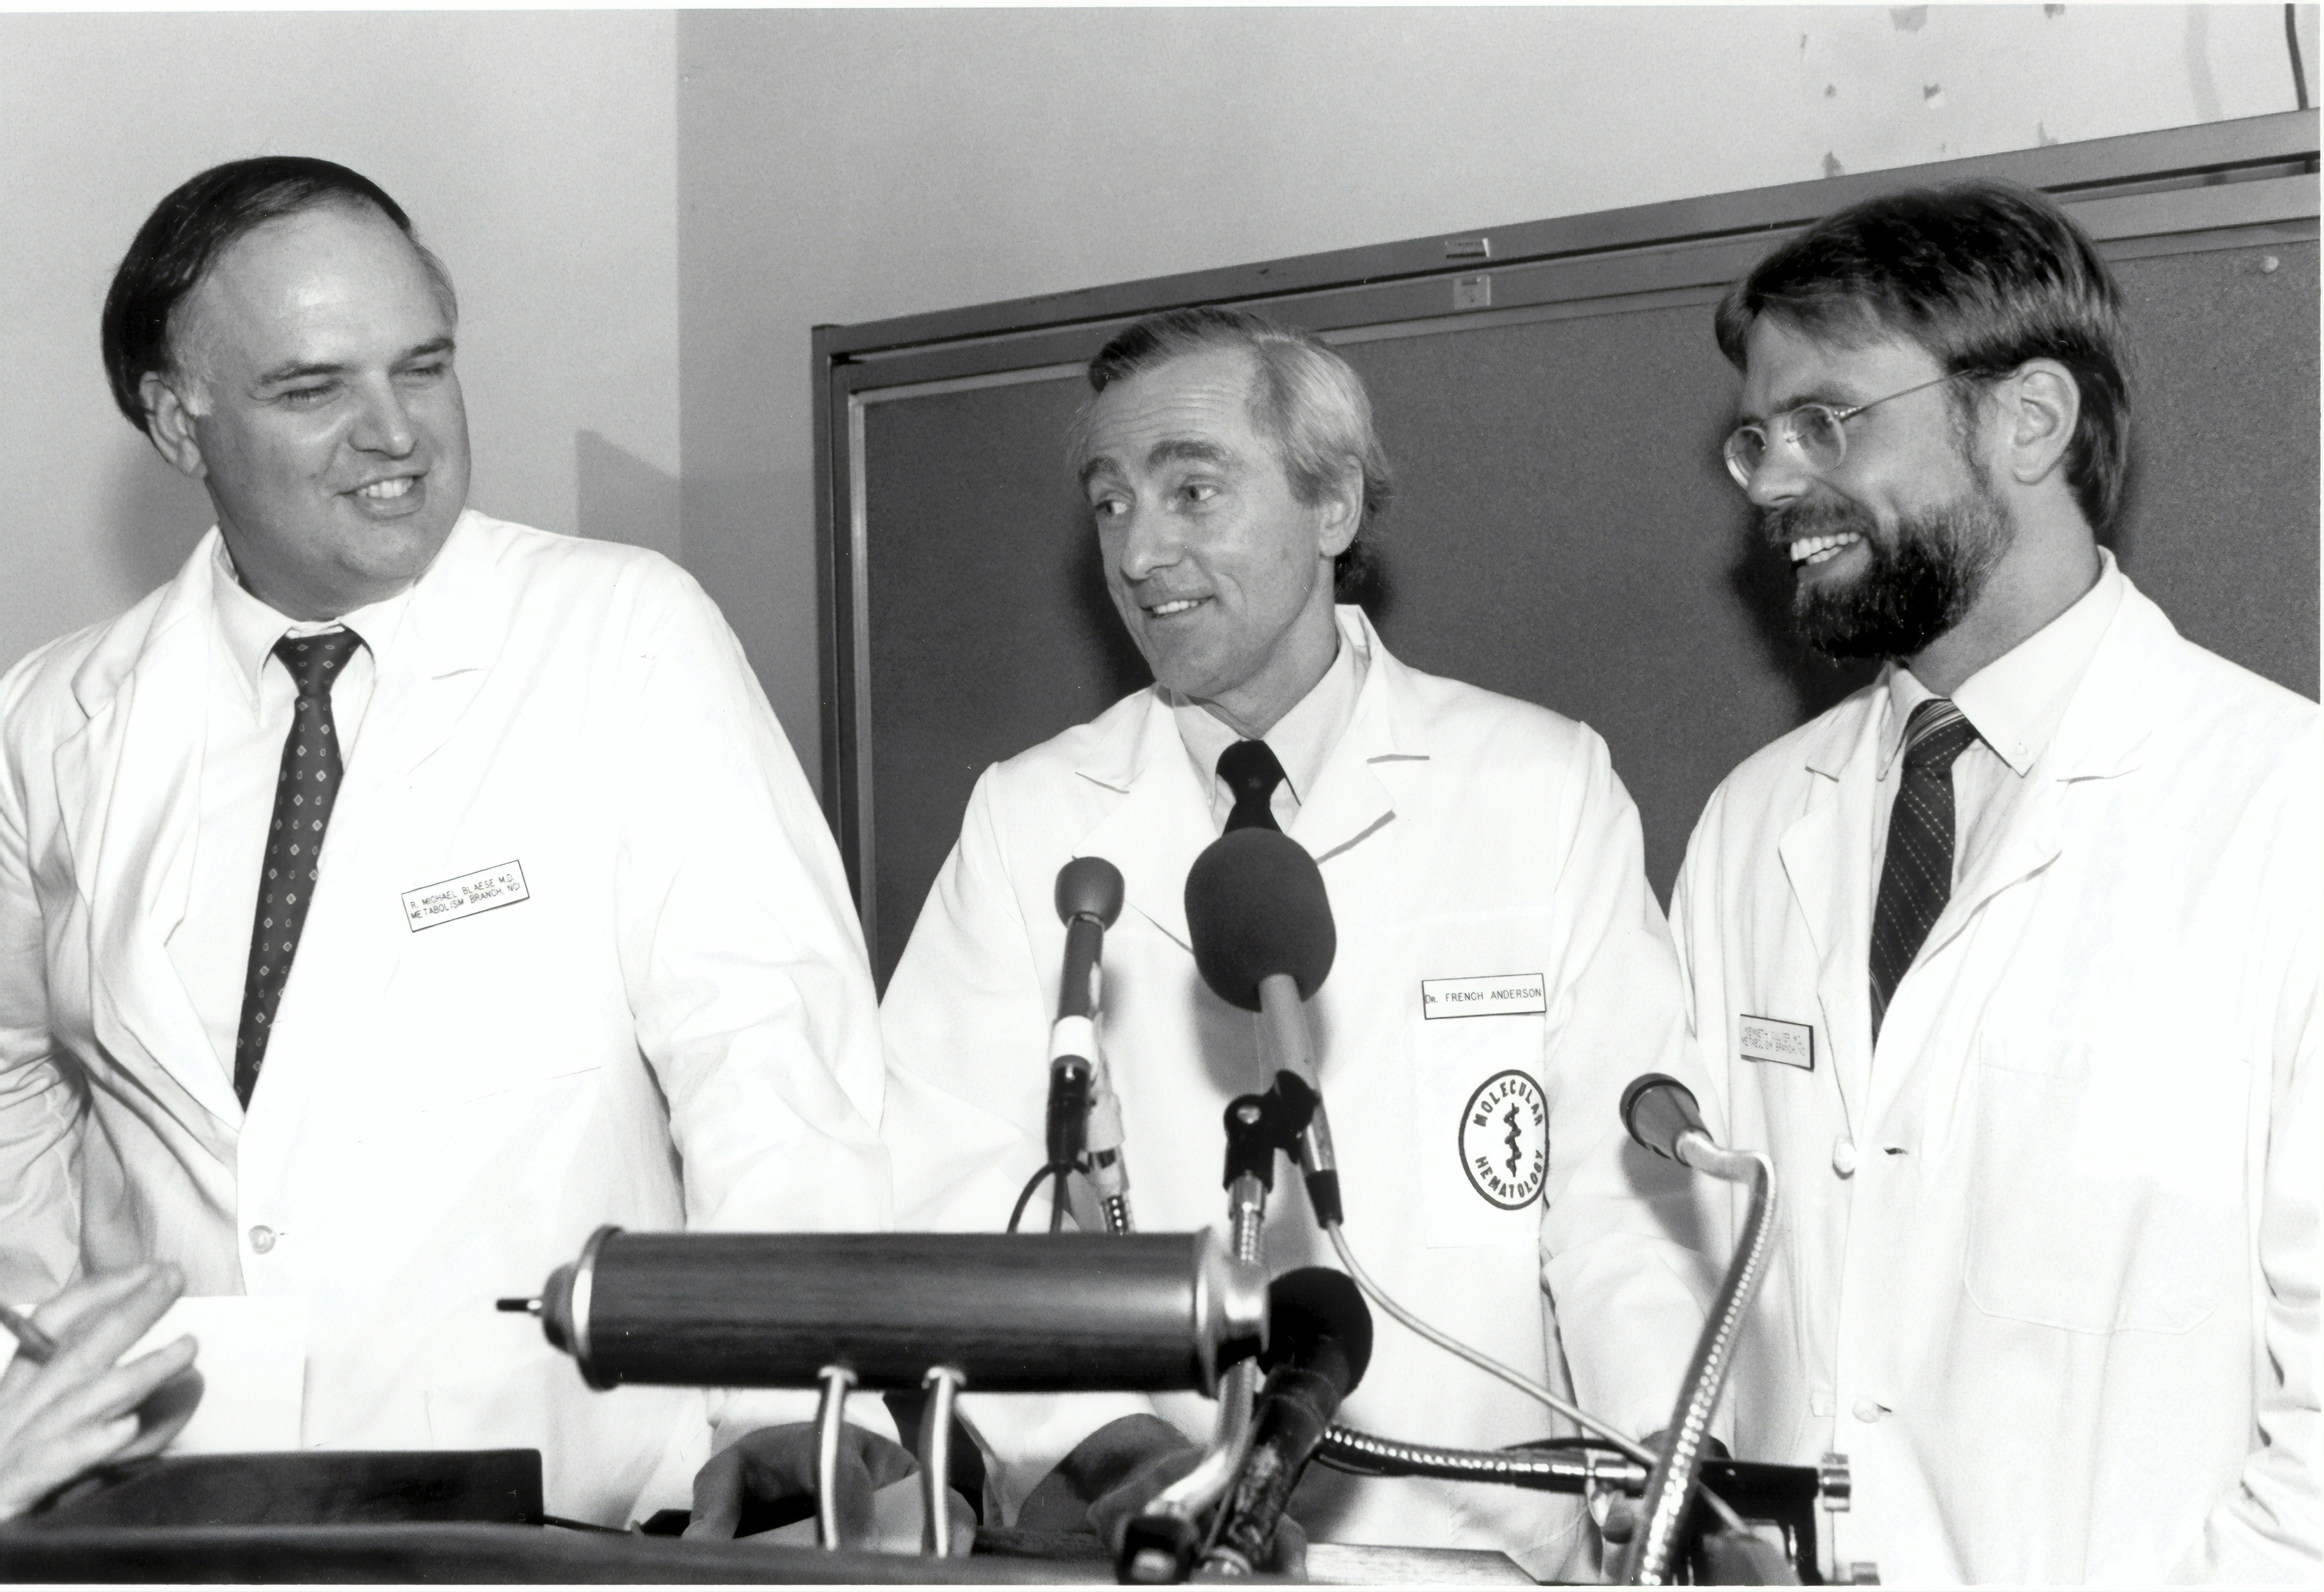 The Gene Therapy press conference held on September 13, 1990. From left to right: R. Michael Blaese, M.D., W. French Anderson, M.D., and Kenneth Culver,. M.D. 1990